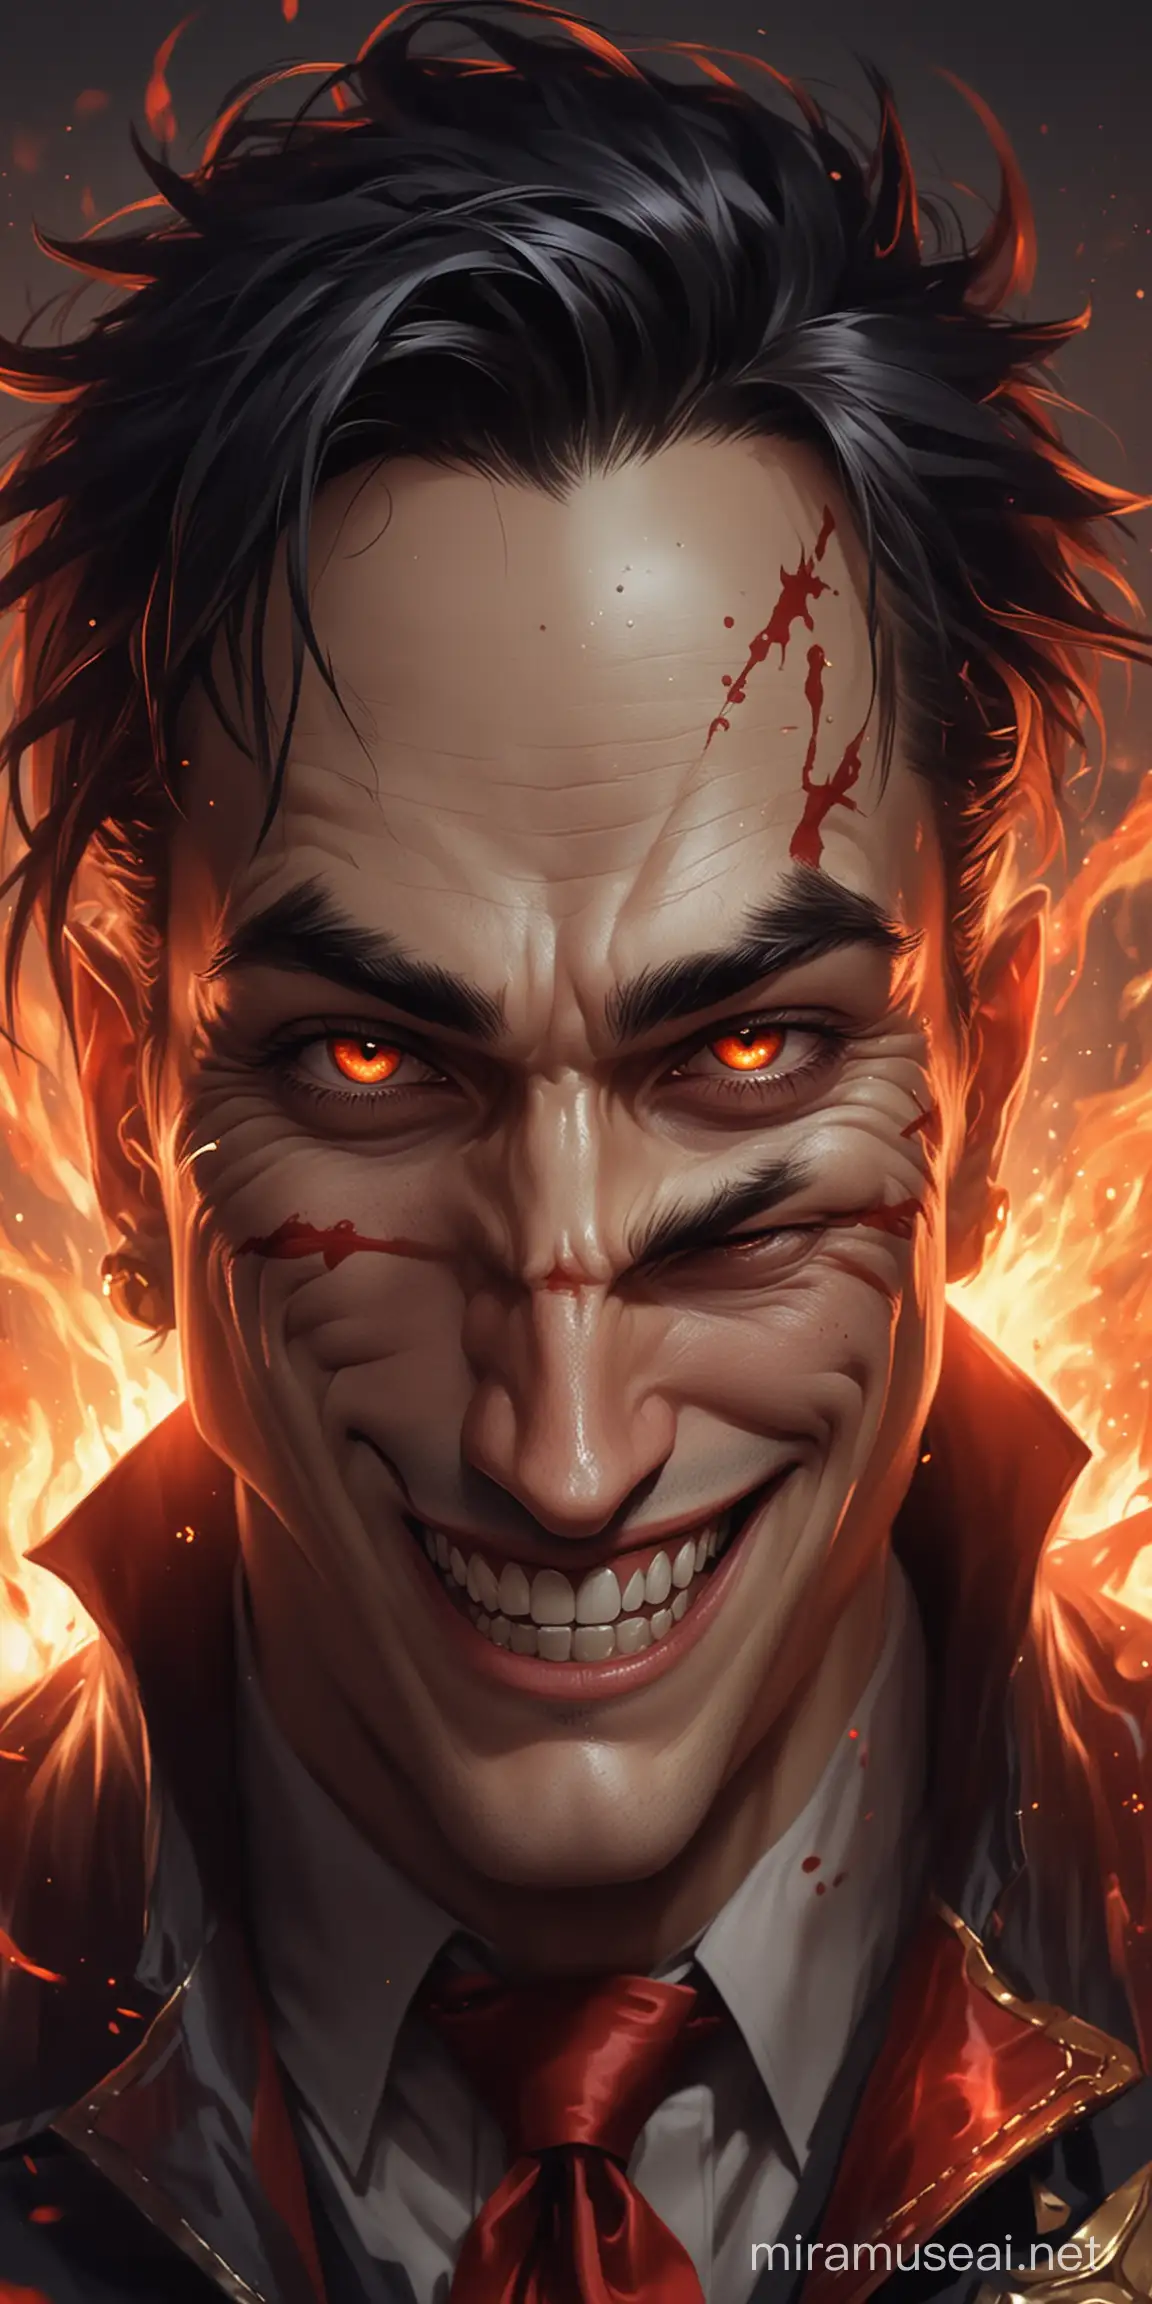 Sinister JokerLike Figure with IronGold Teeth Smiling Amidst Red Smoke